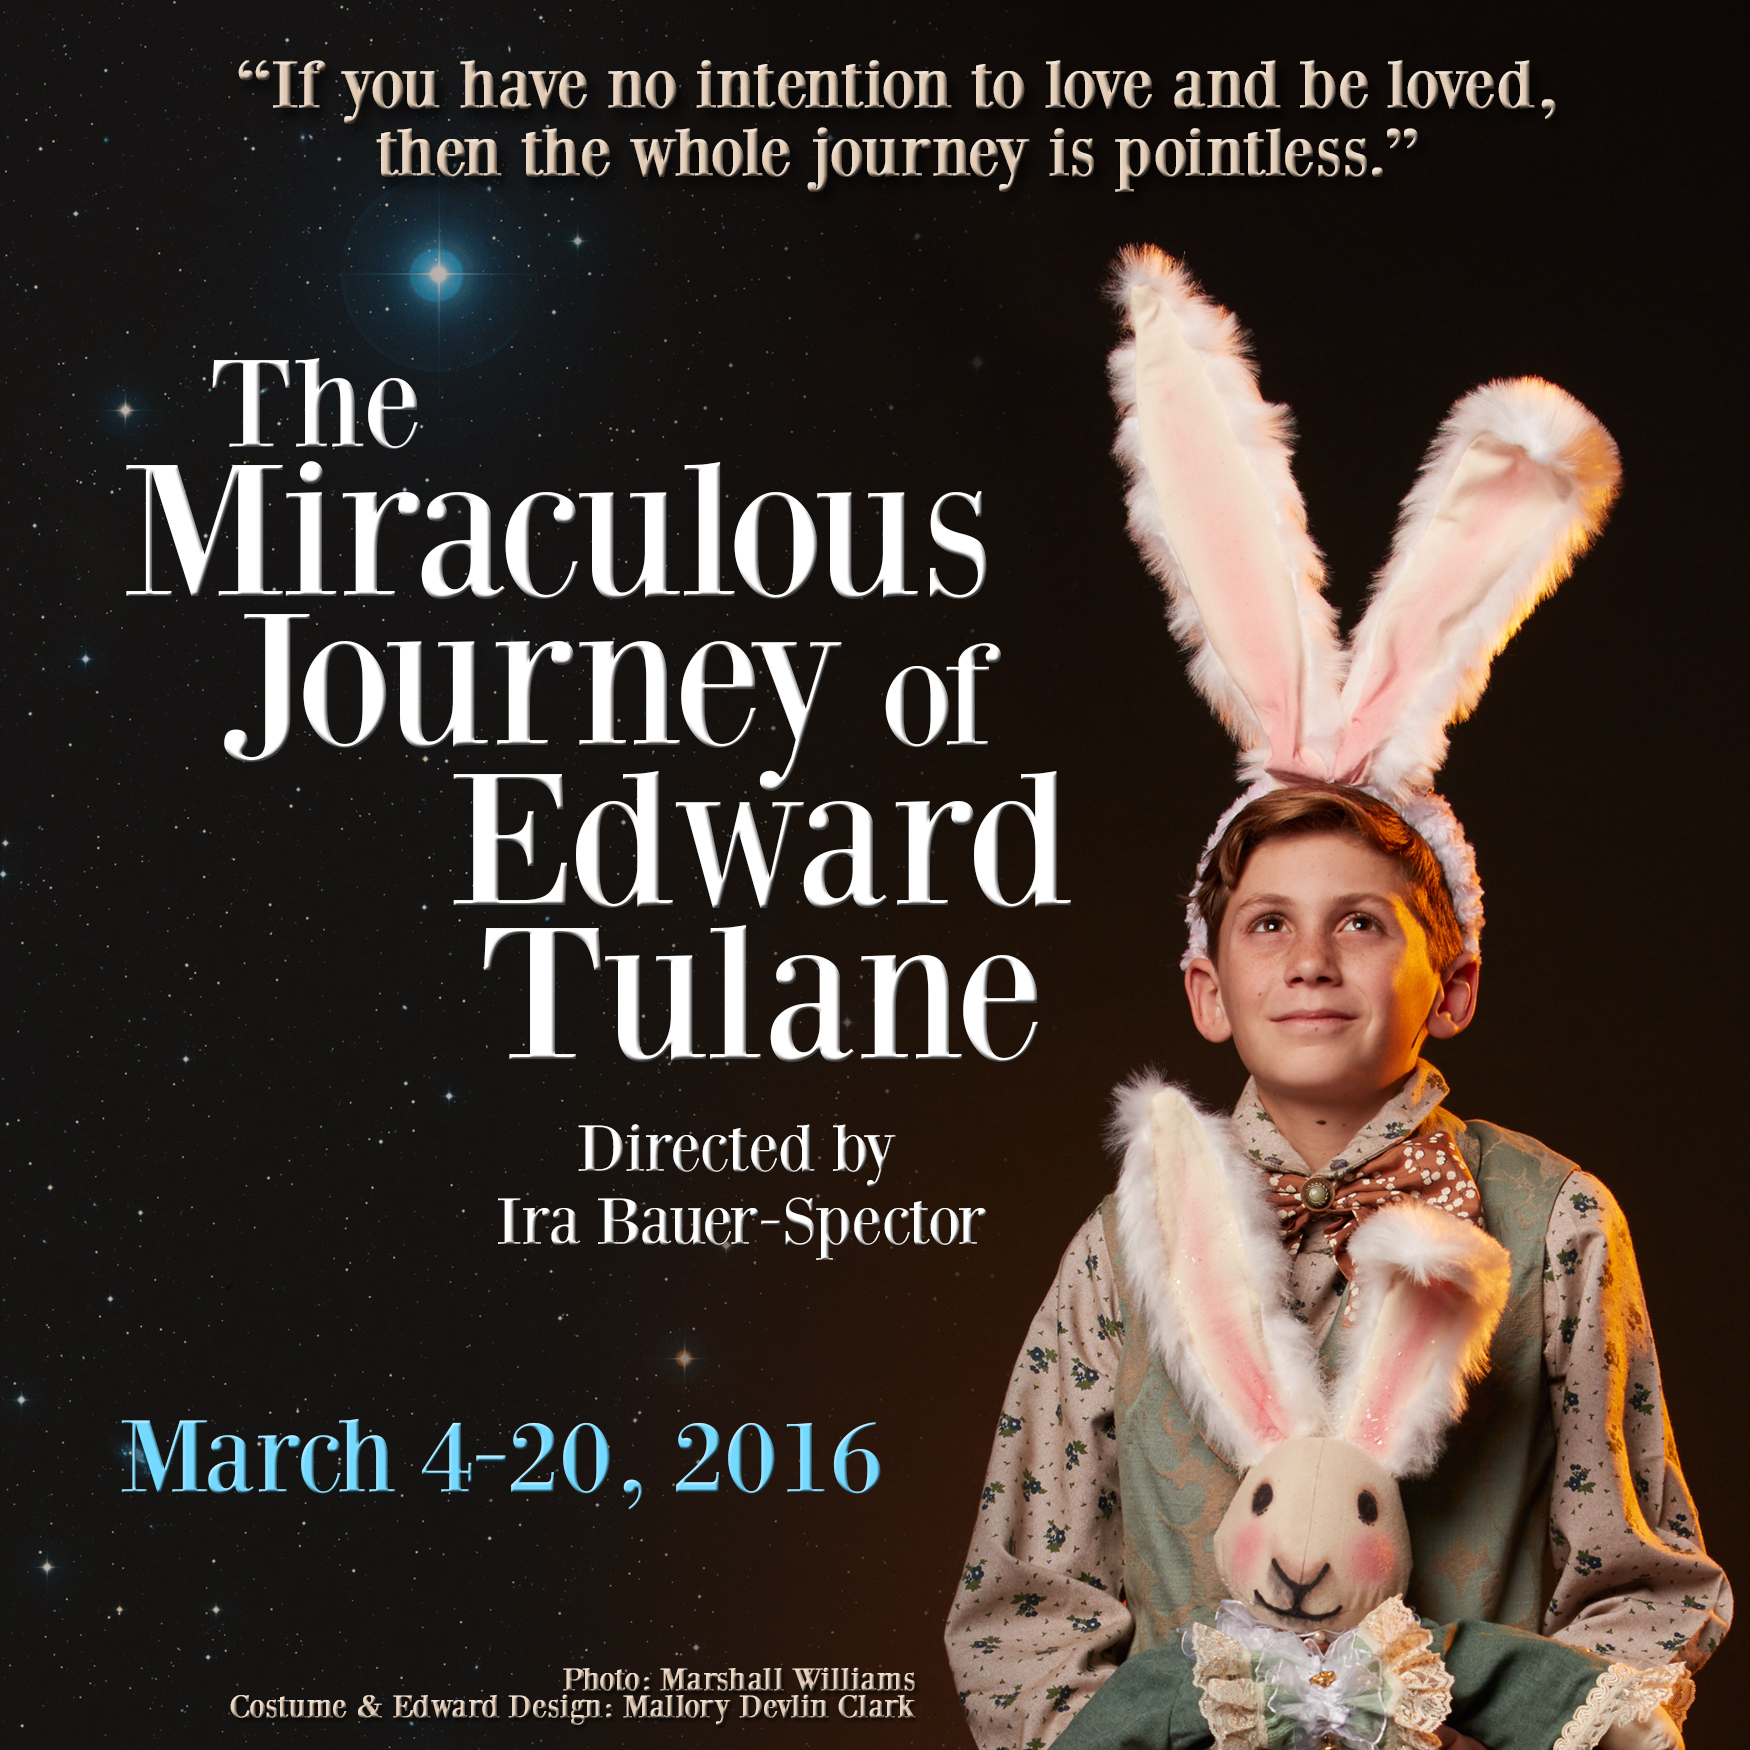 The Miraculous Journey of Edward Tulane (Official Trailer), TRAILER  DROP!!! Denver Children's Theatre's production of The Miraculous Journey  of Edward Tulane is one of the most BEAUTIFUL, MAGICAL, and POWERFUL